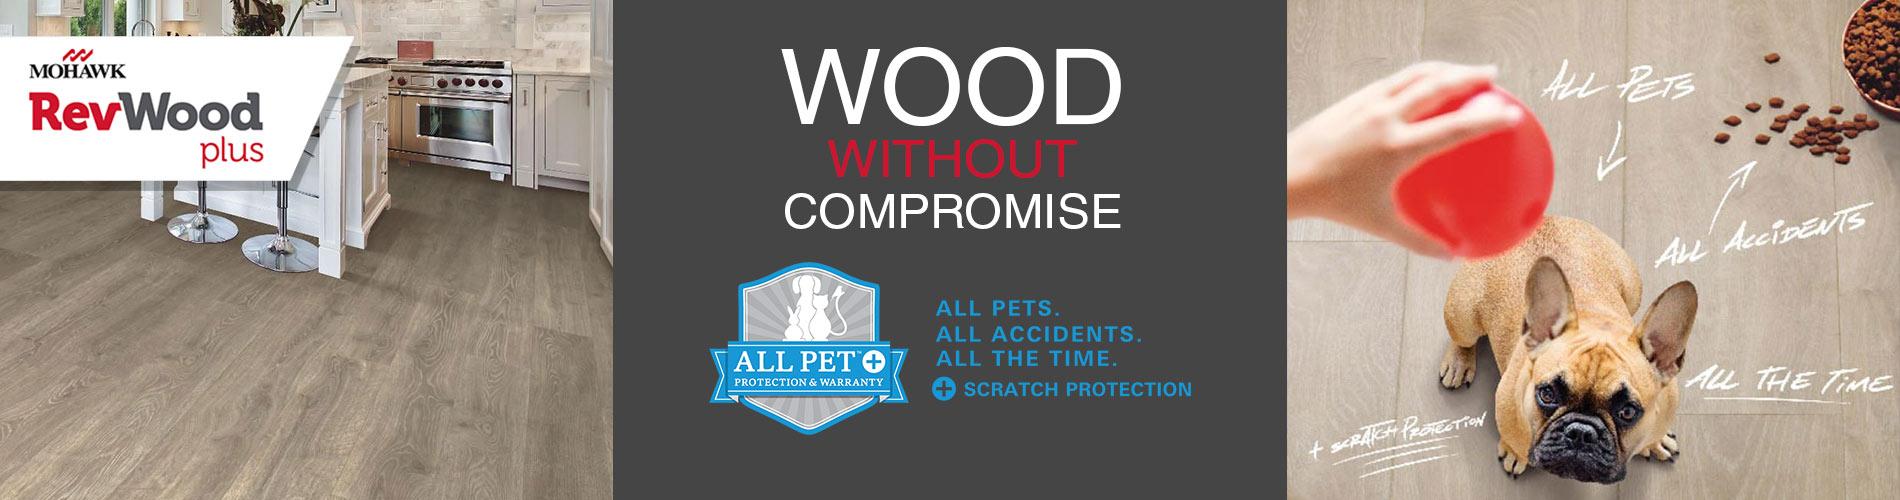 Mohawk RevWood Plus - Wood Without Compromise - All Pet Plus Protection - On Sale Now